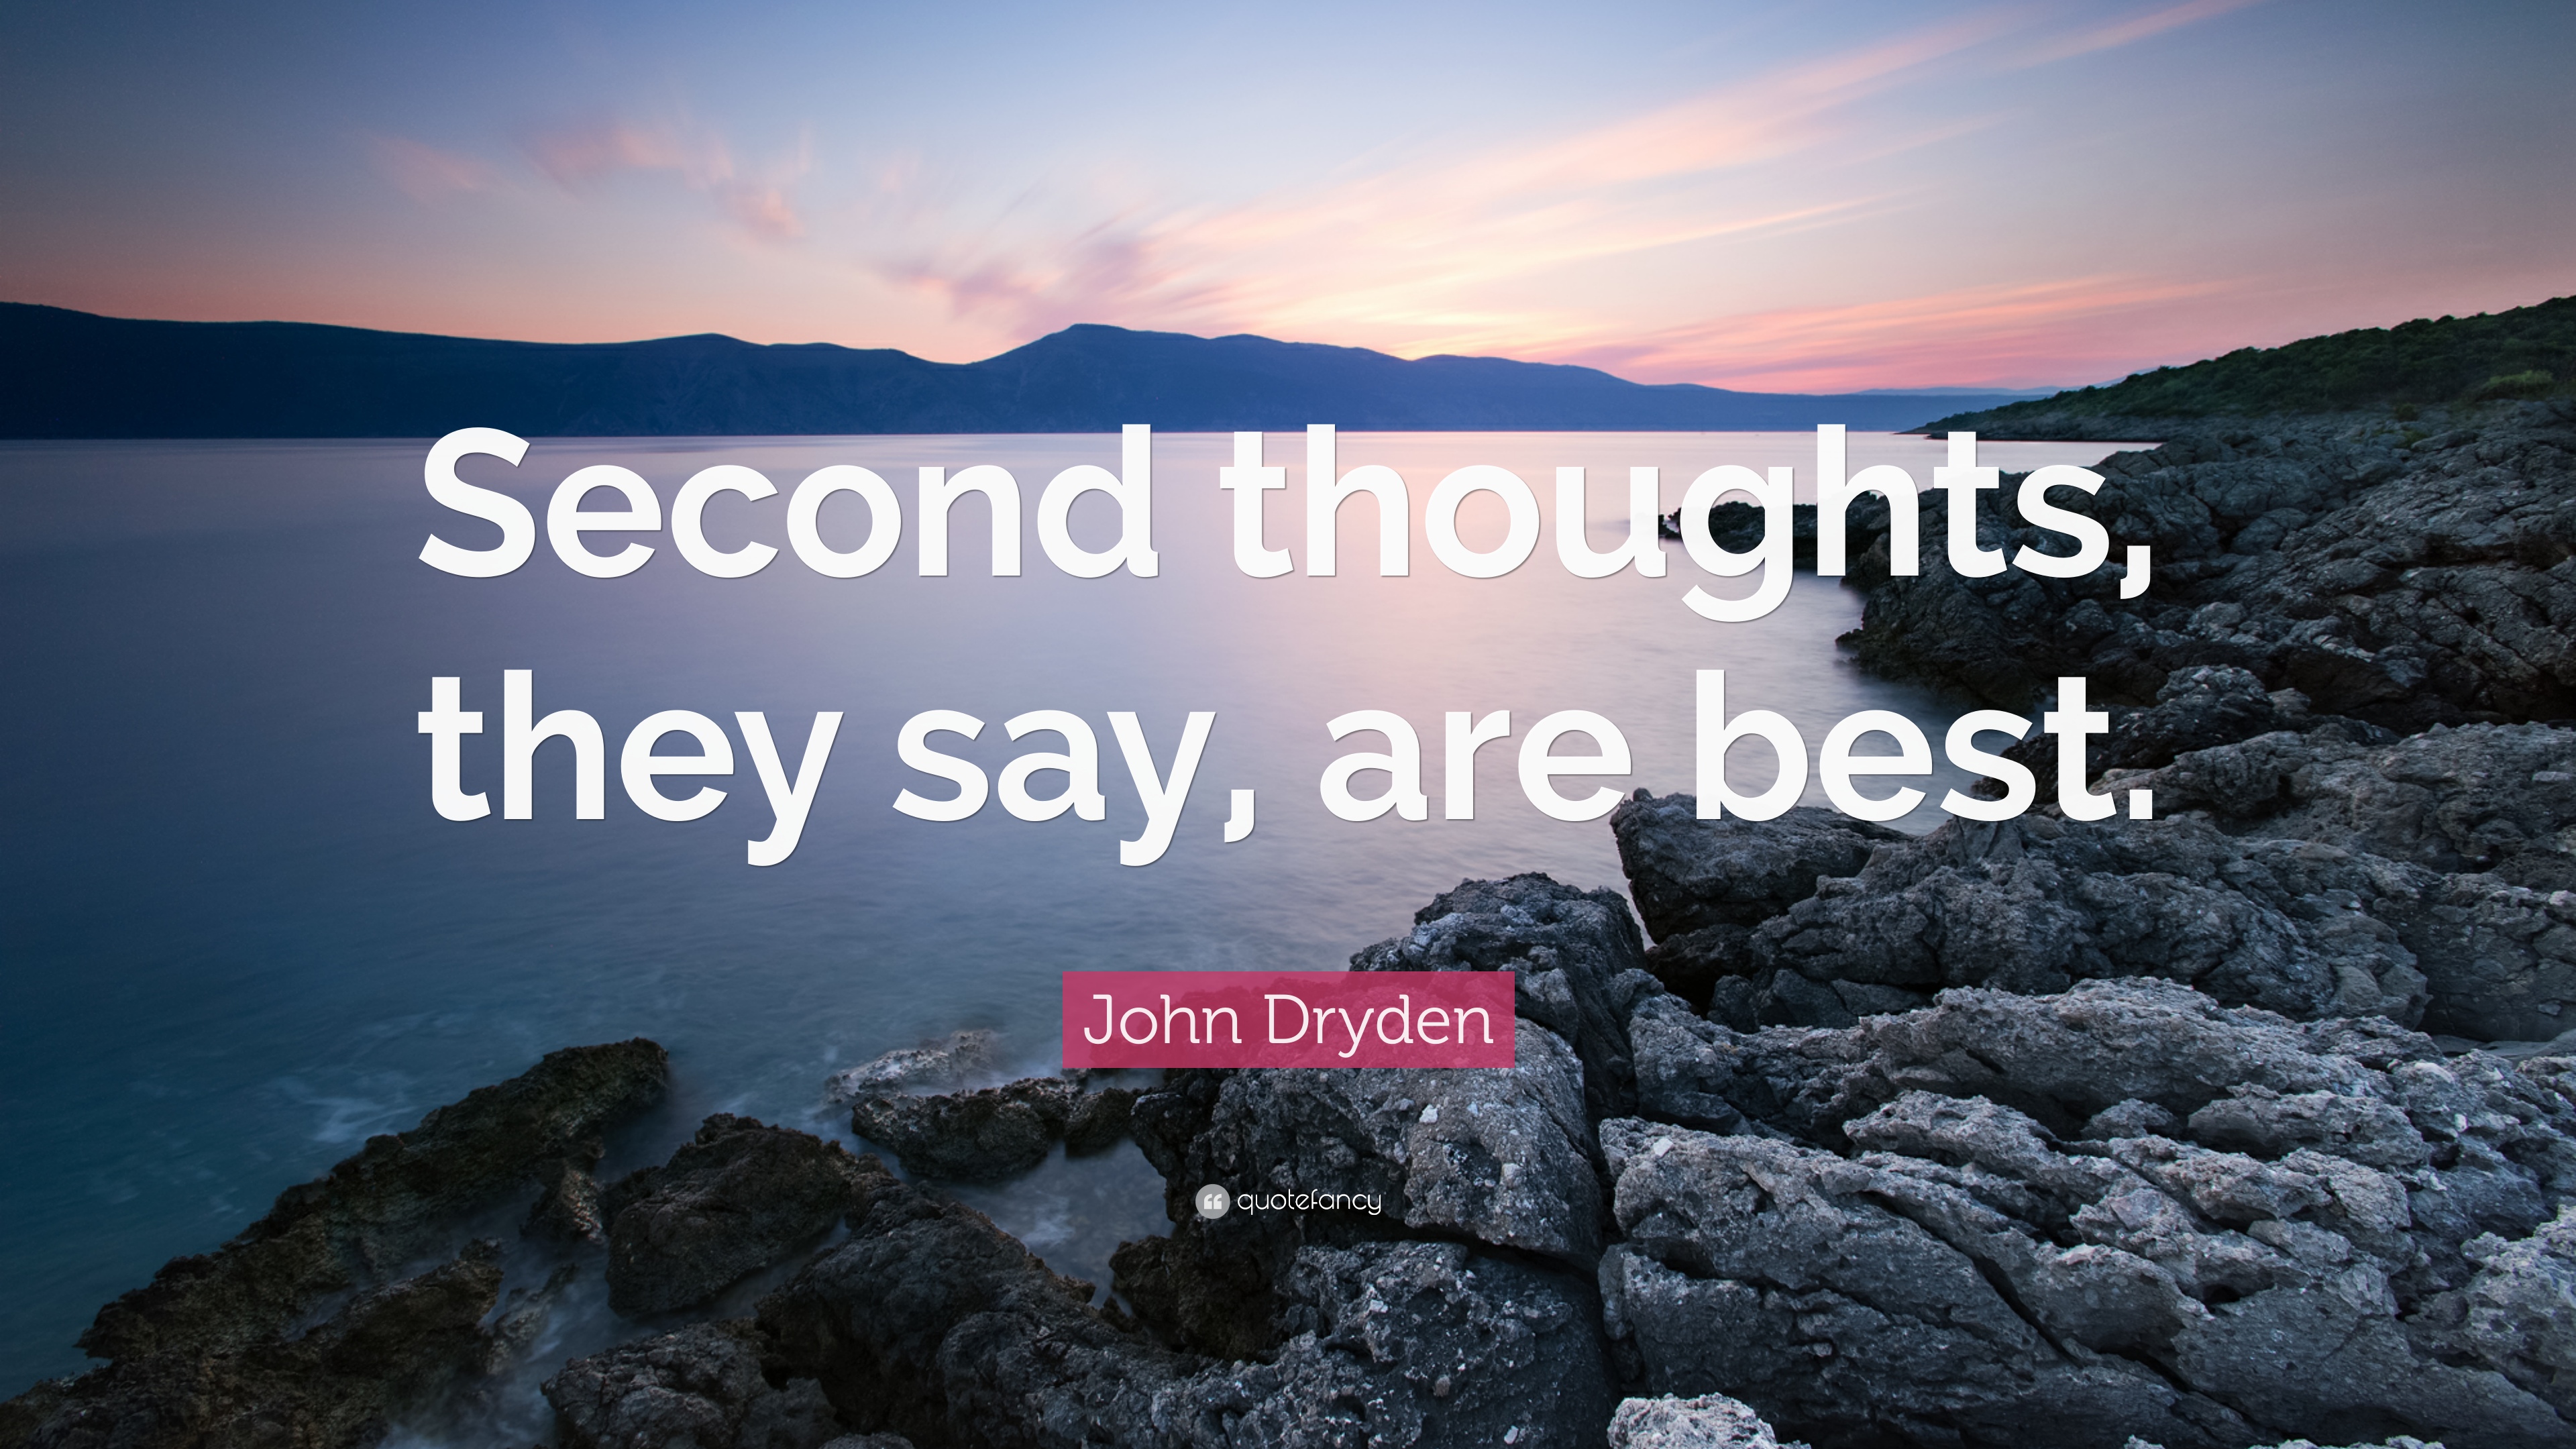 John Dryden Quote: “Second thoughts, they say, are best.” 7